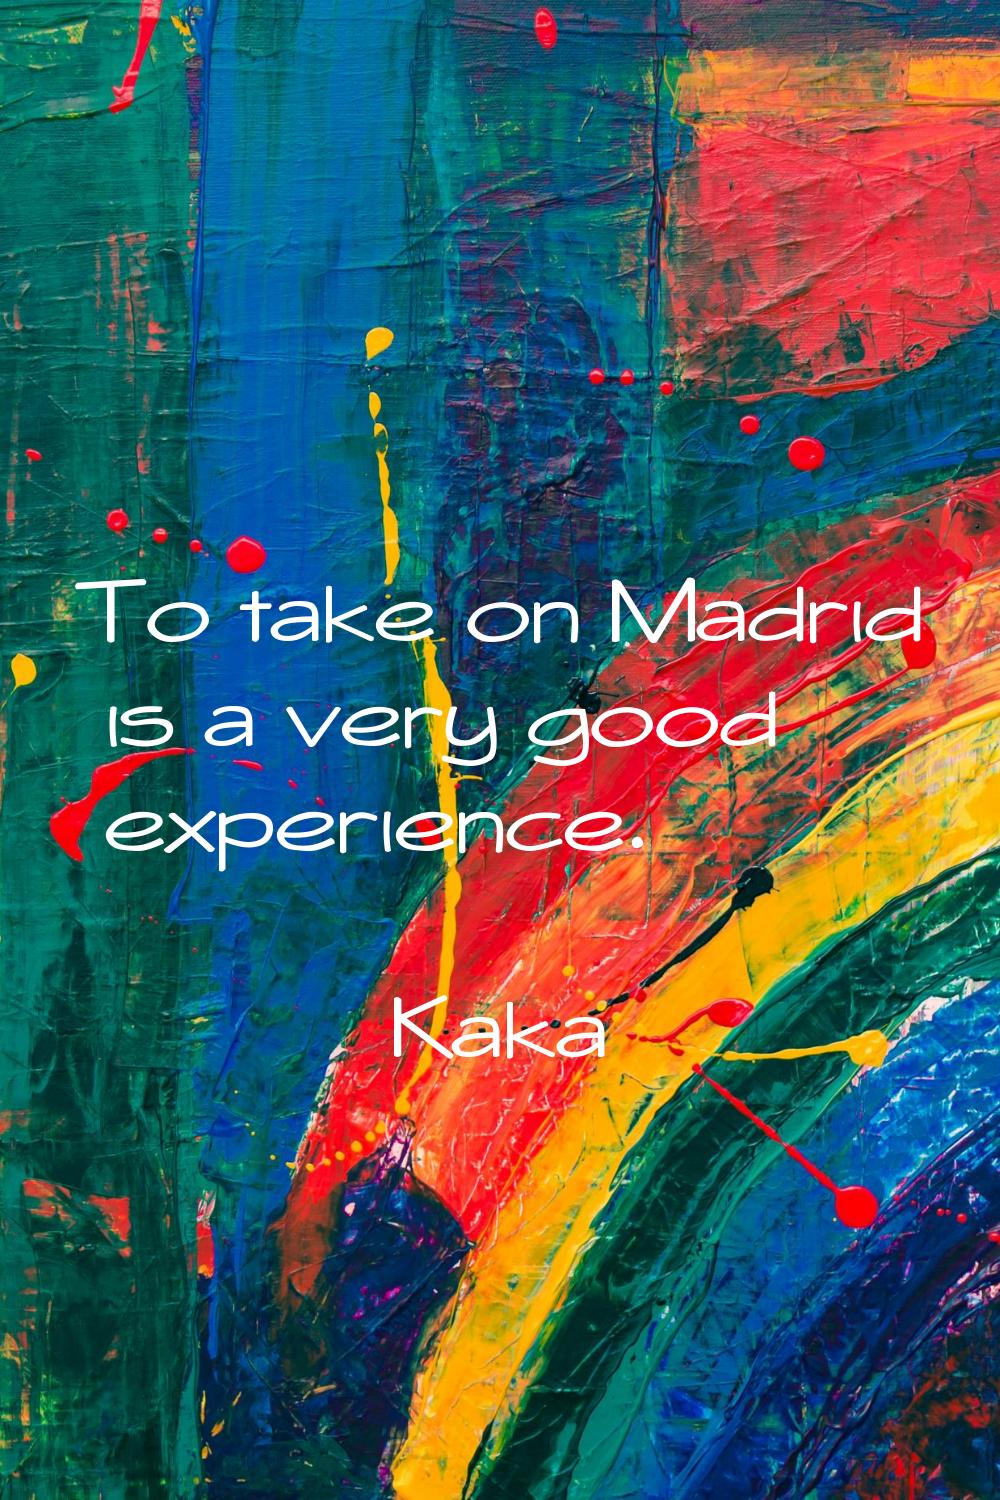 To take on Madrid is a very good experience.